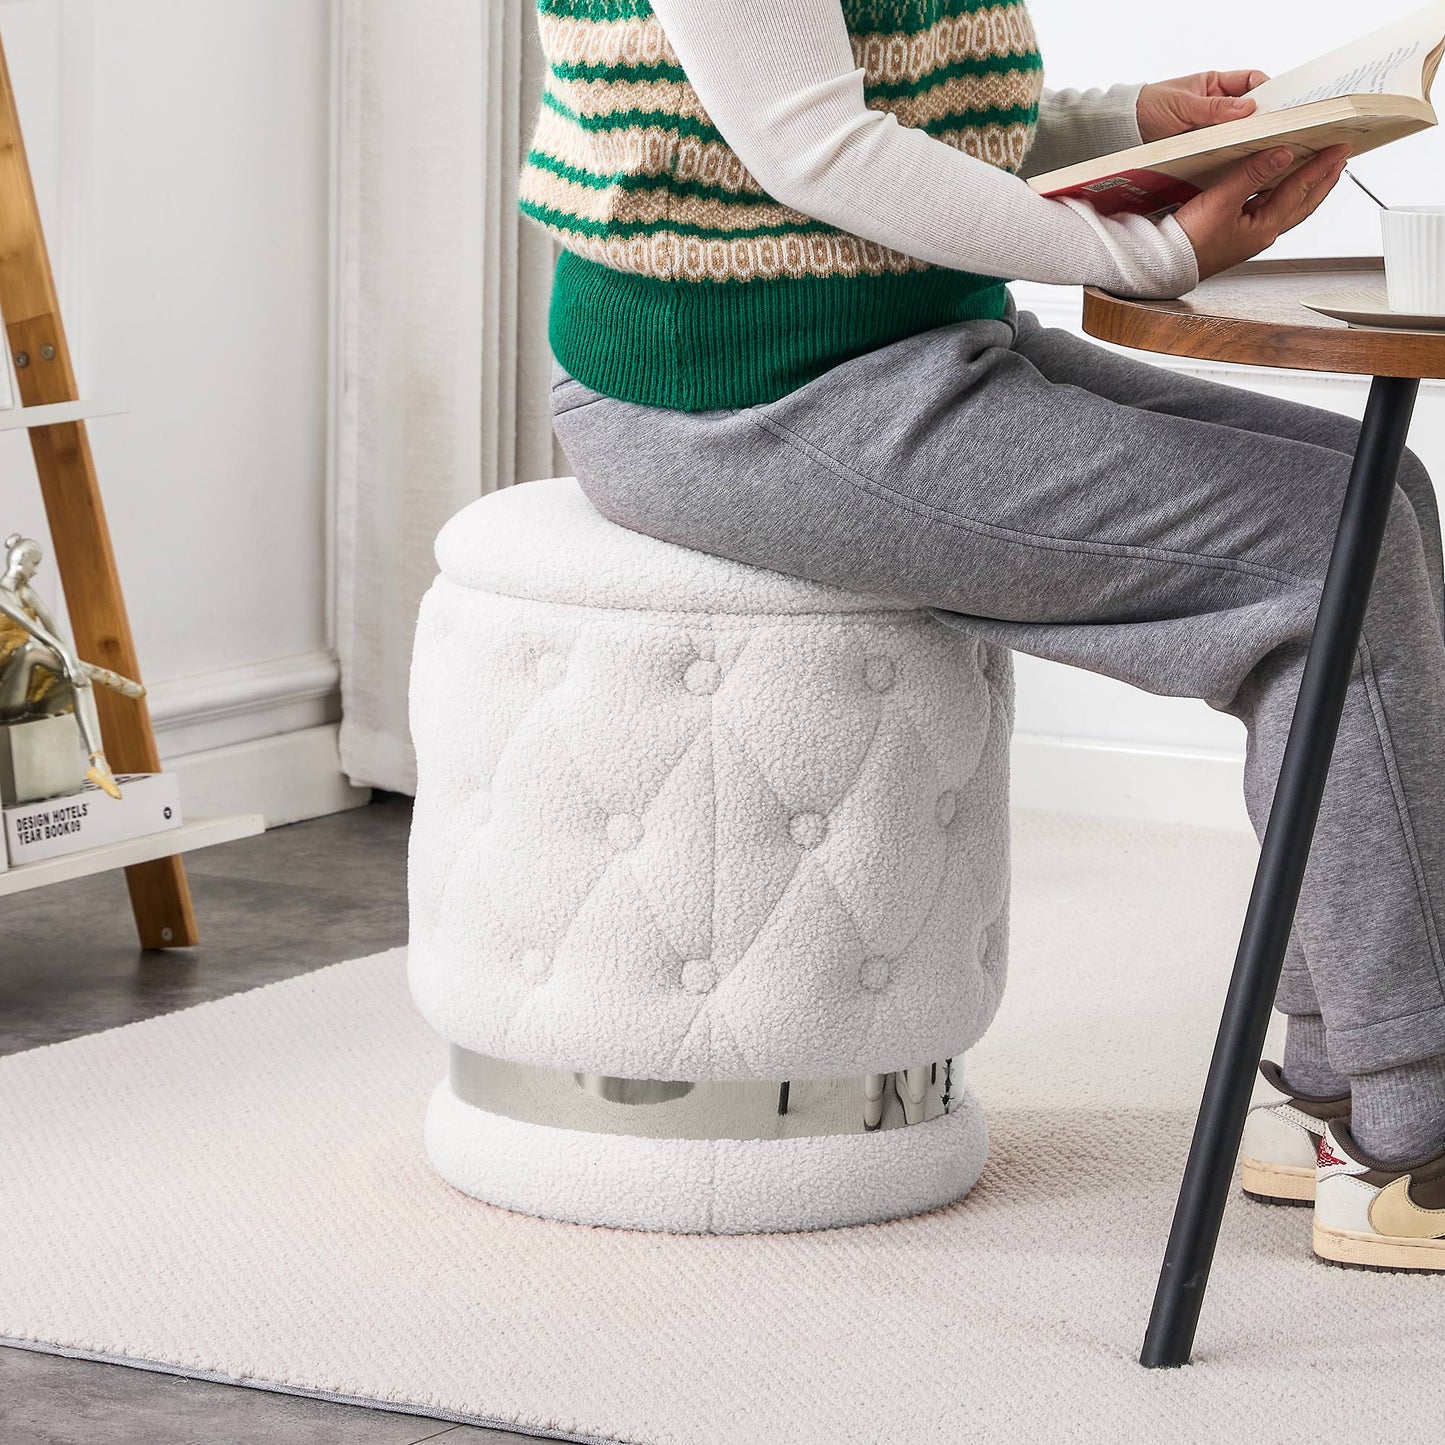 Chair White Round-shape Teddy velvet Makeup Stool Footstool, chair with storage space .Applicable to living room dresser kitchen bedroom dining room